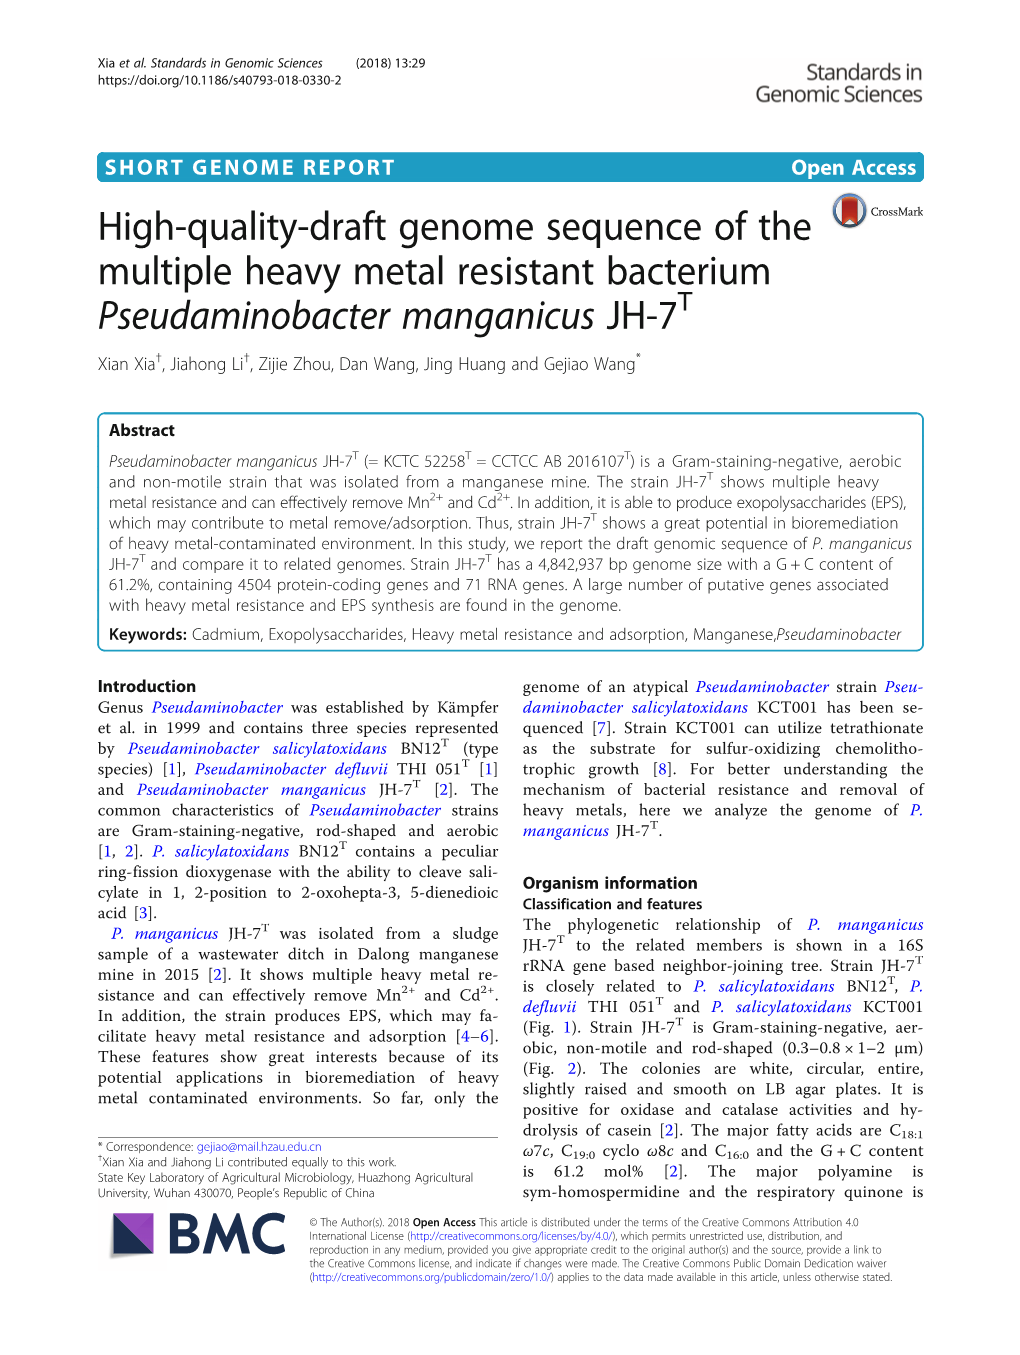 High-Quality-Draft Genome Sequence of the Multiple Heavy Metal Resistant